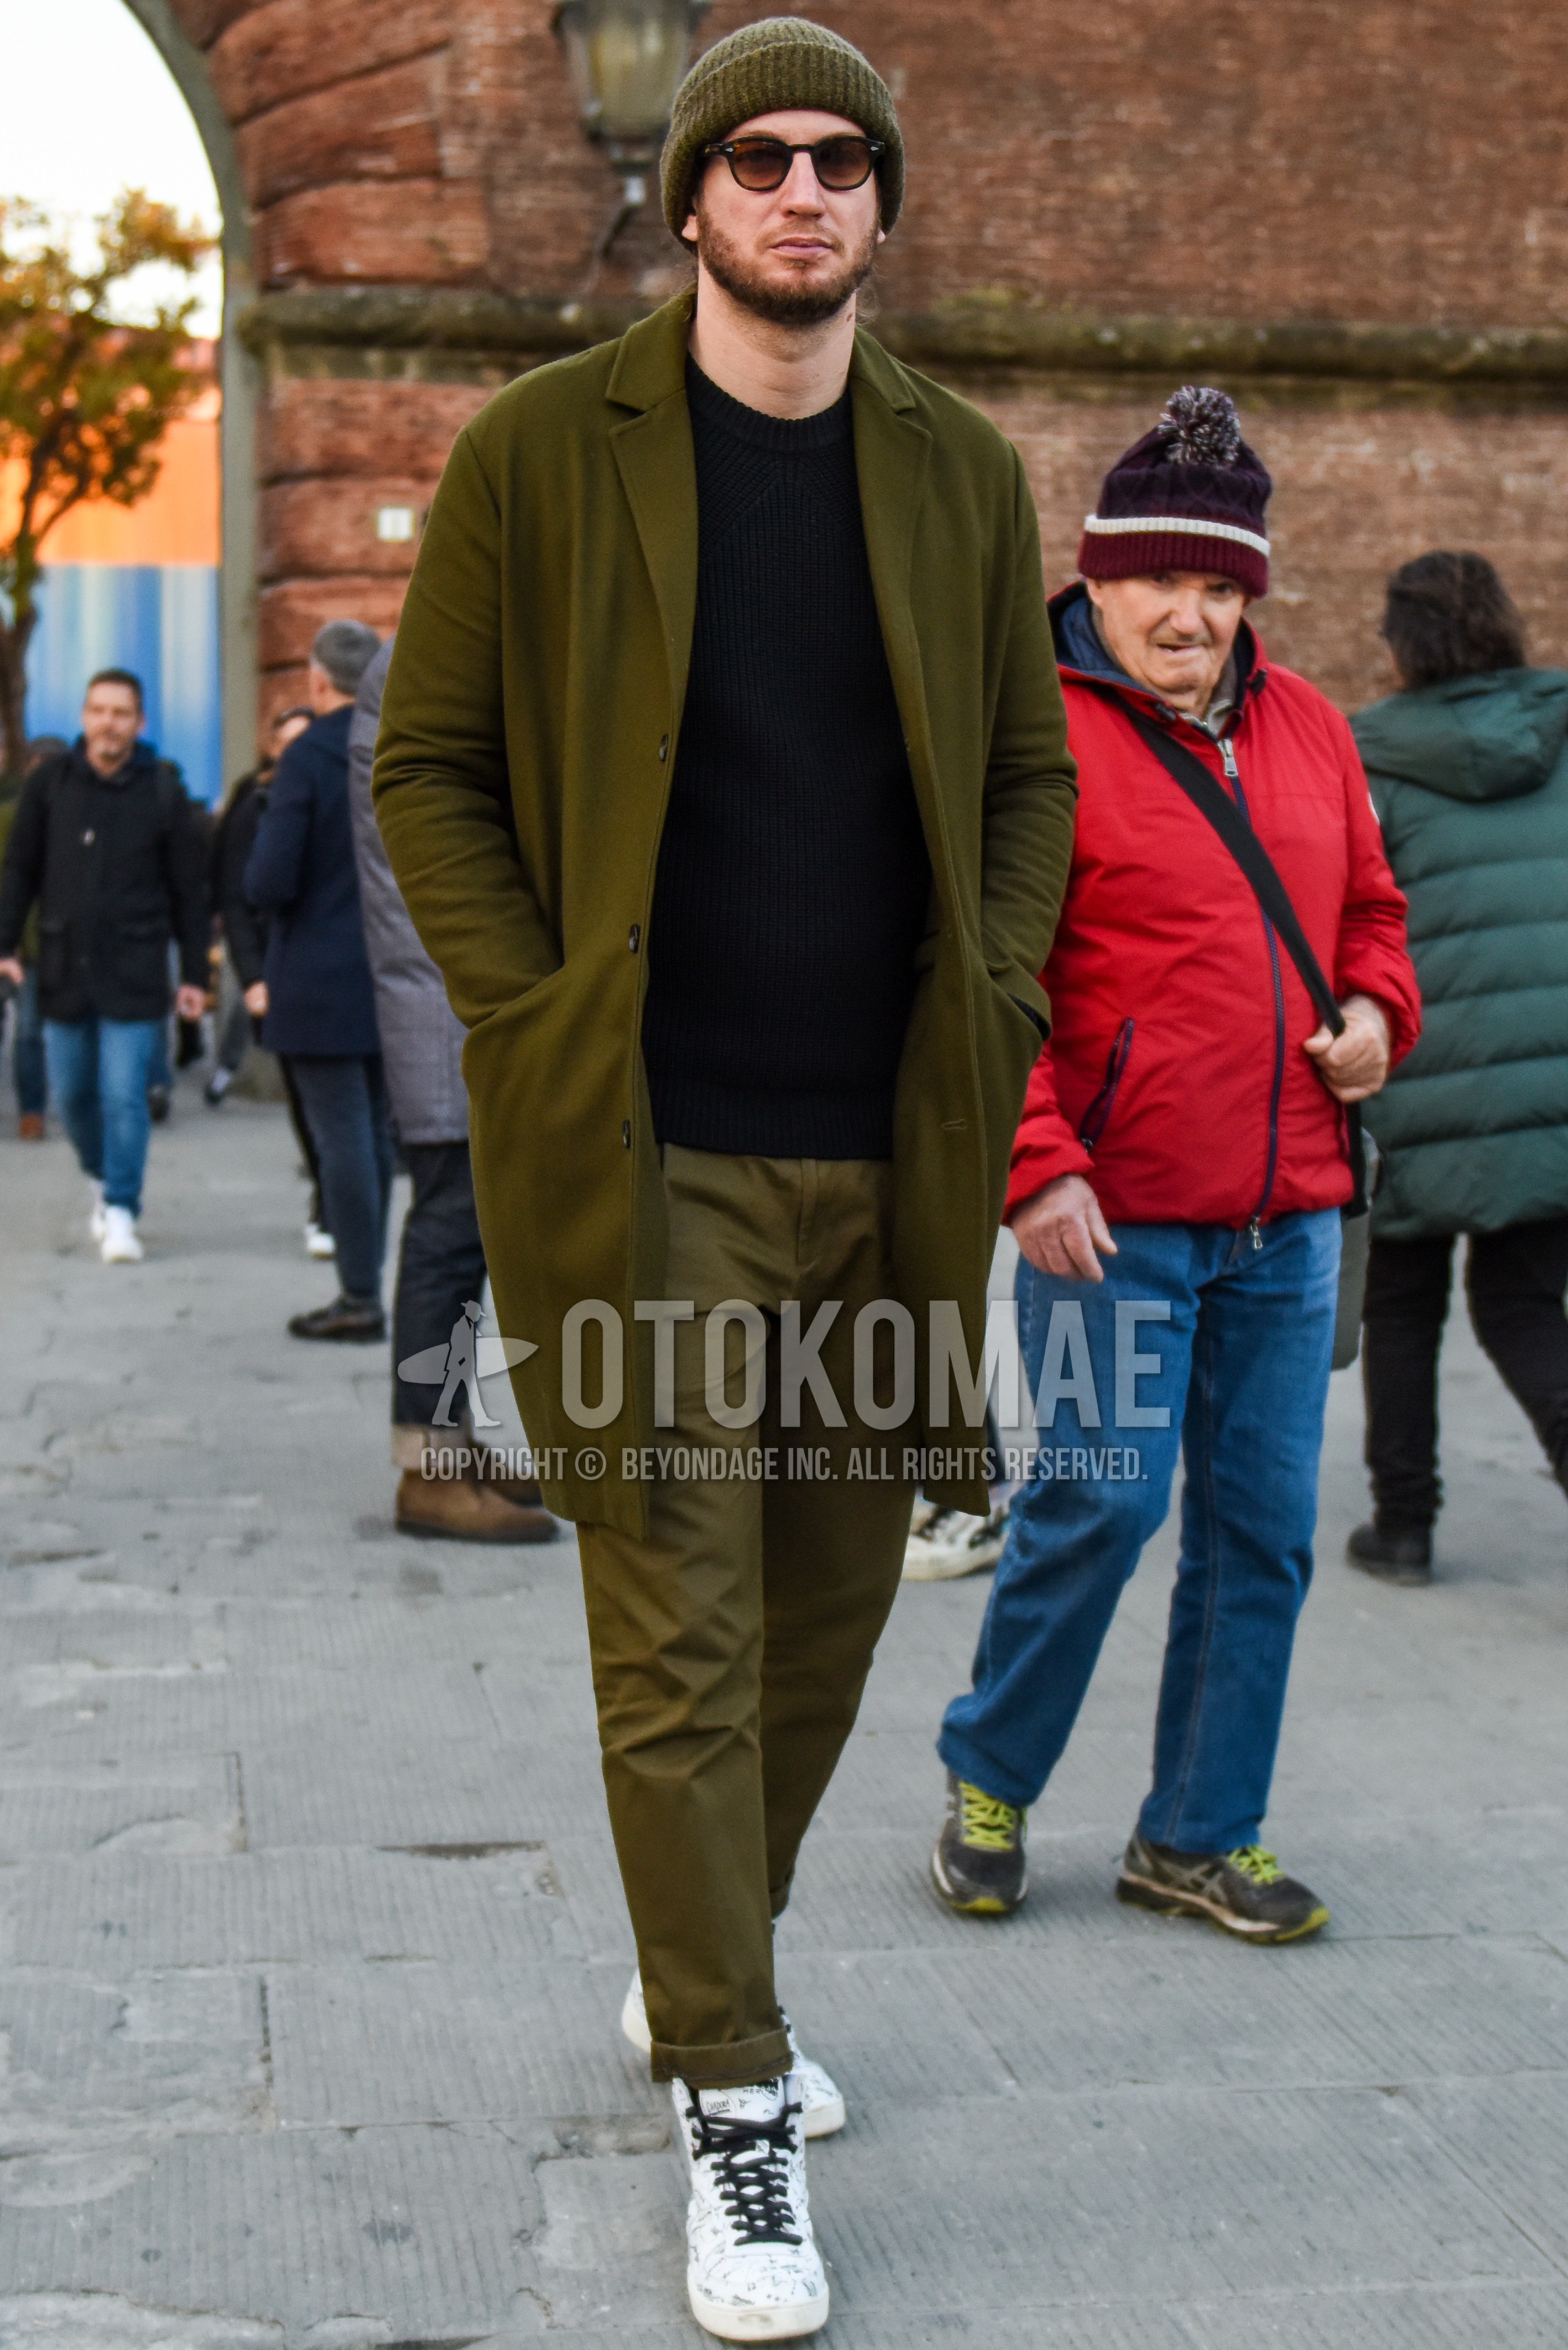 Men's autumn winter outfit with olive green plain knit cap, black plain sunglasses, olive green plain chester coat, black plain sweater, olive green plain chinos, white high-cut sneakers.